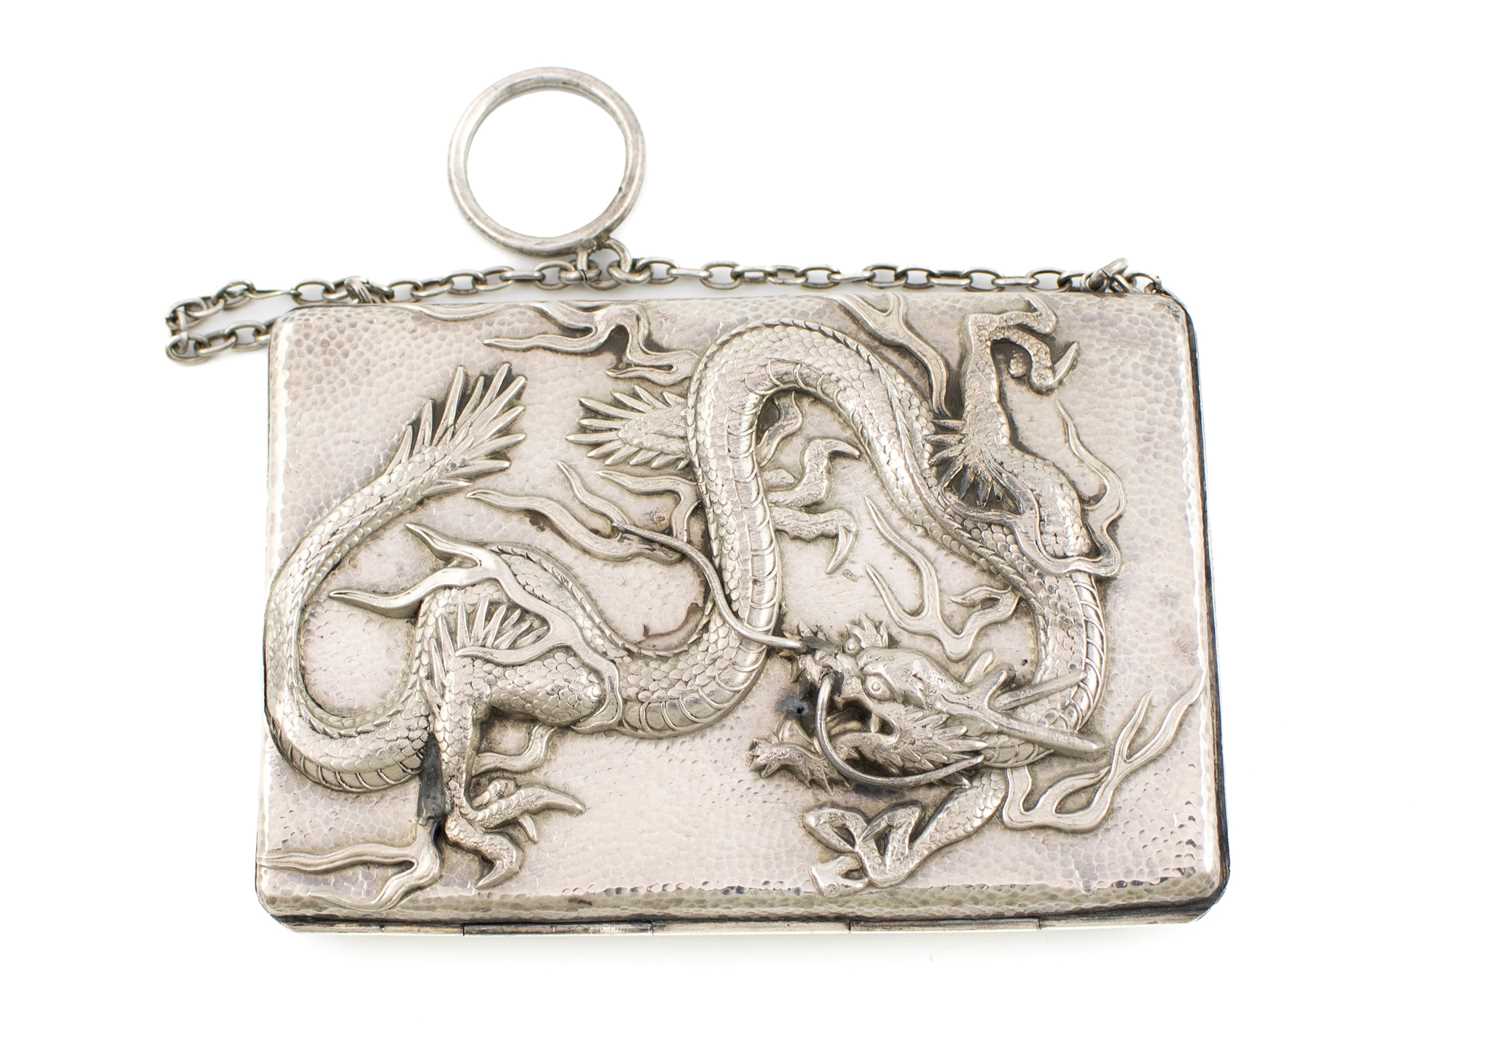 A late-19th century Chinese silver card case/purse, unmarked, rectangular form, embossed with